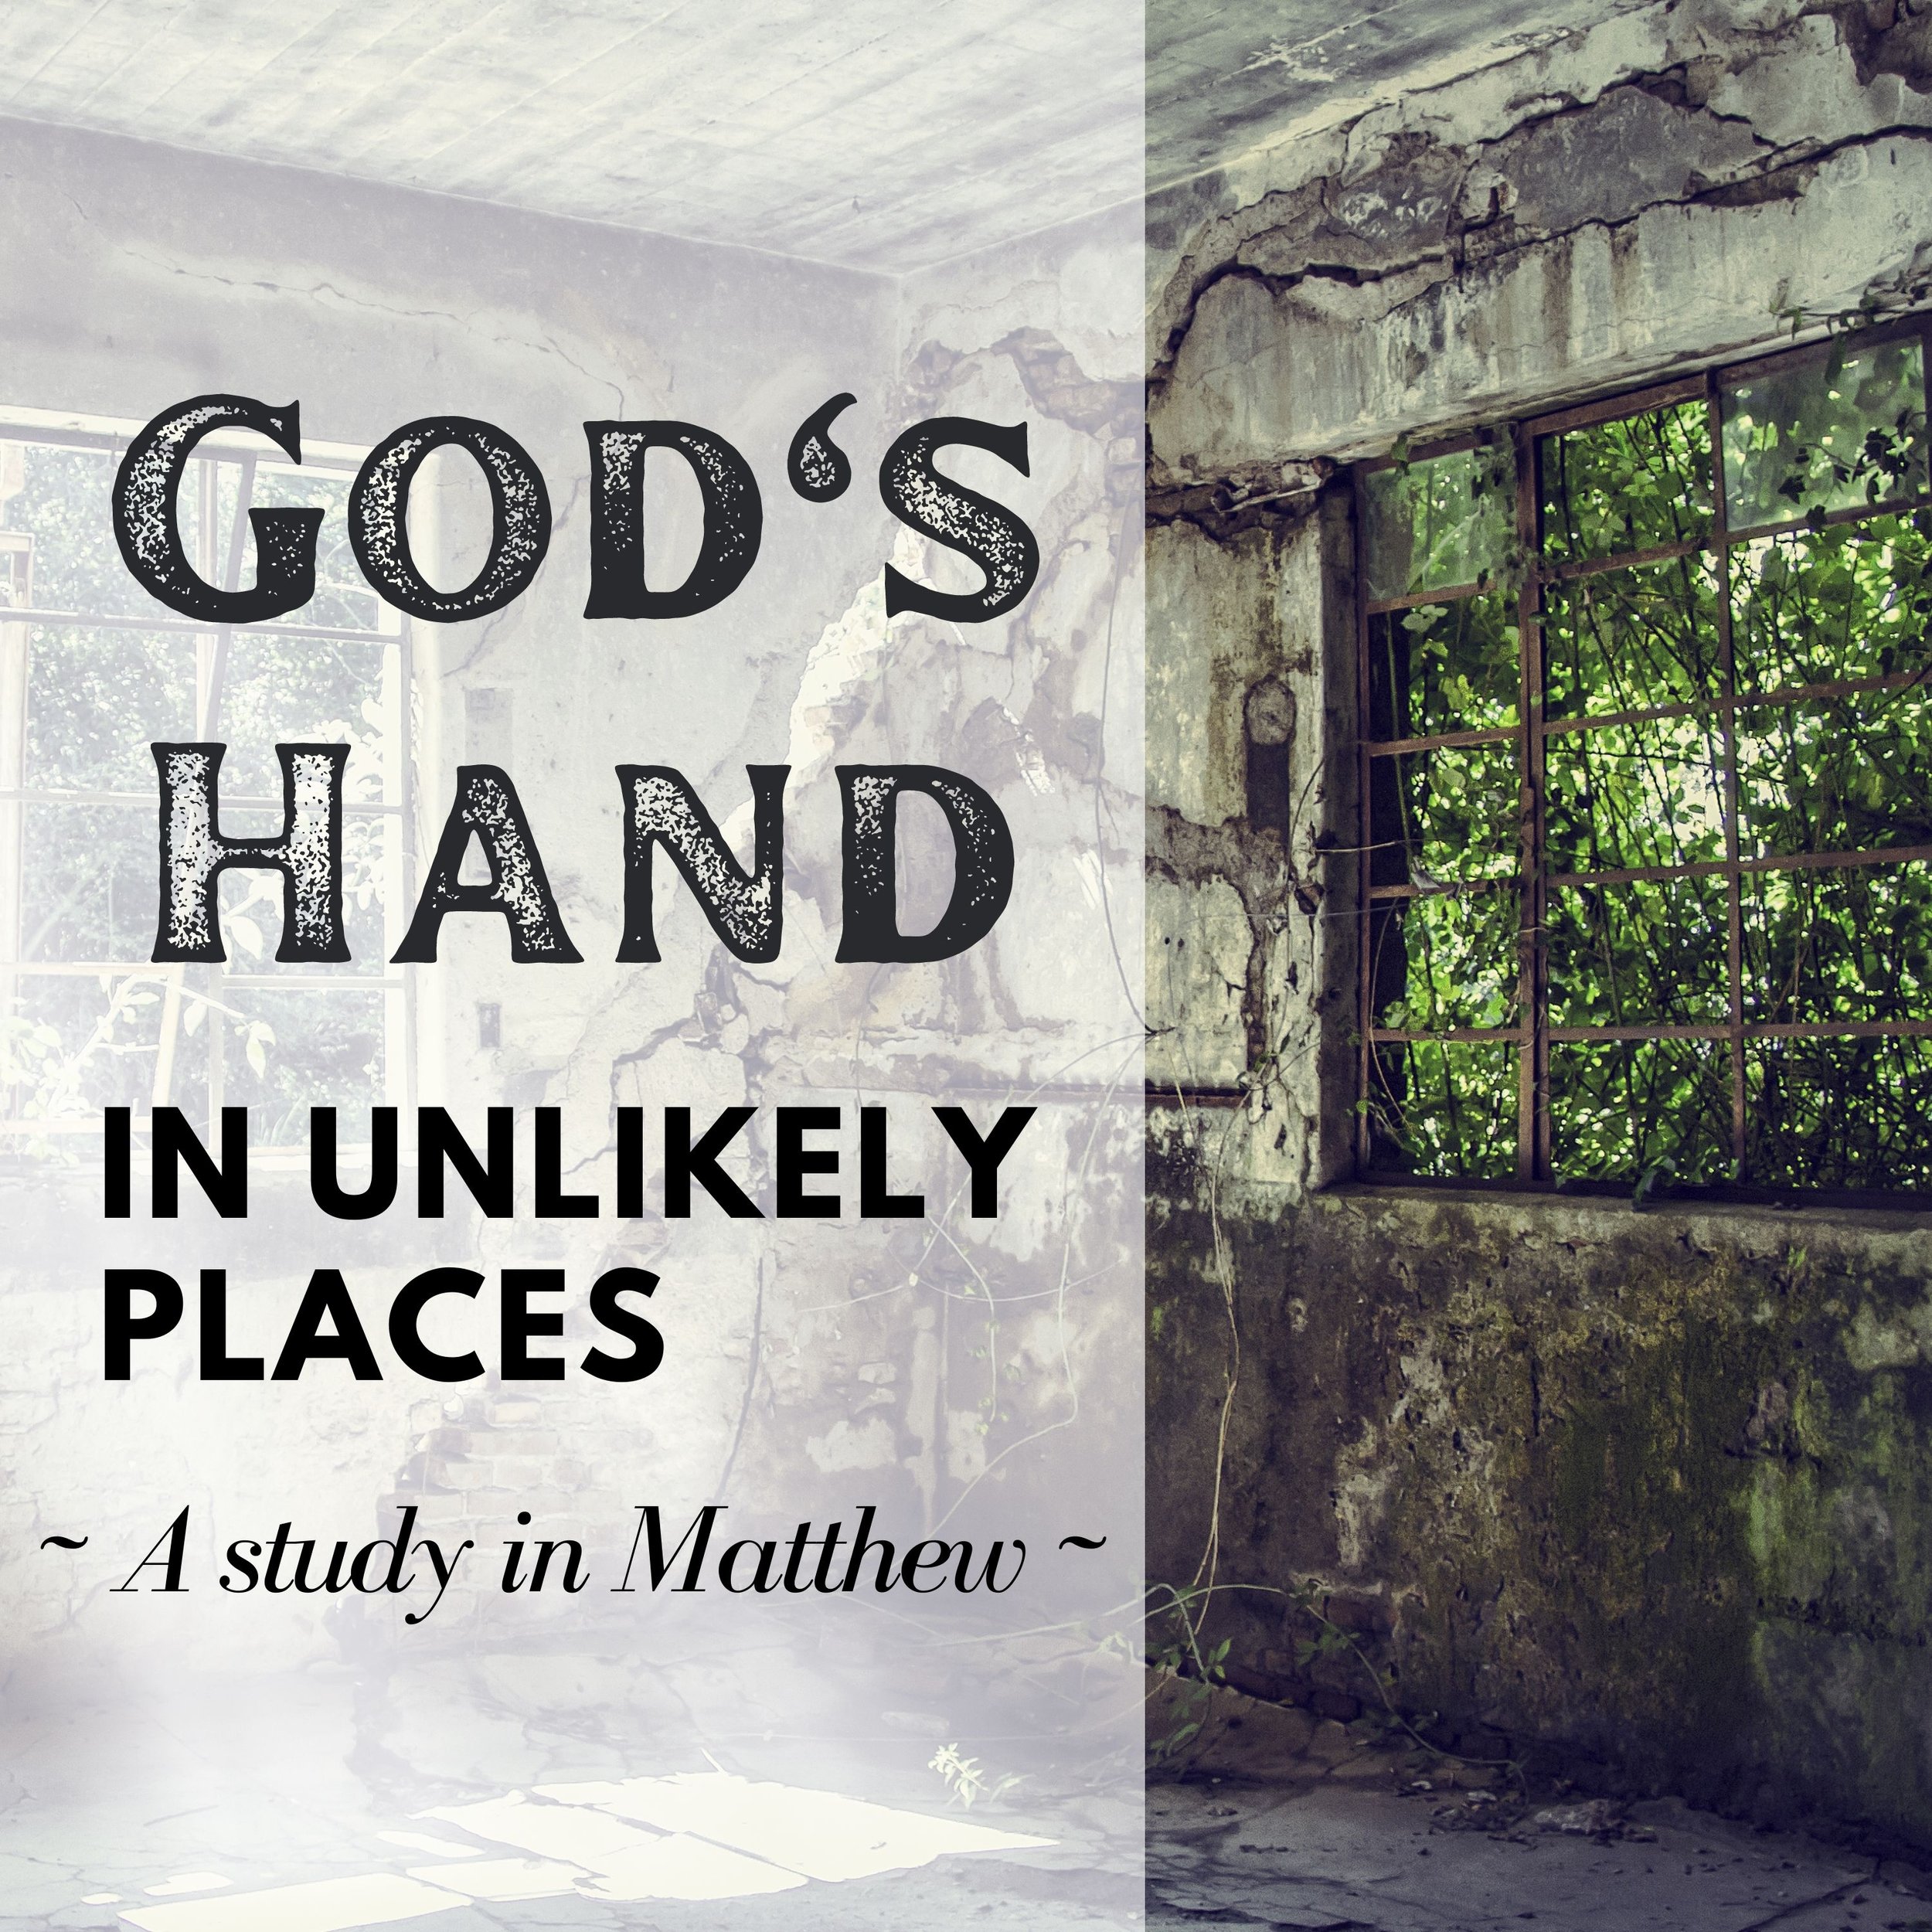 God's Hand In Unlikely Places